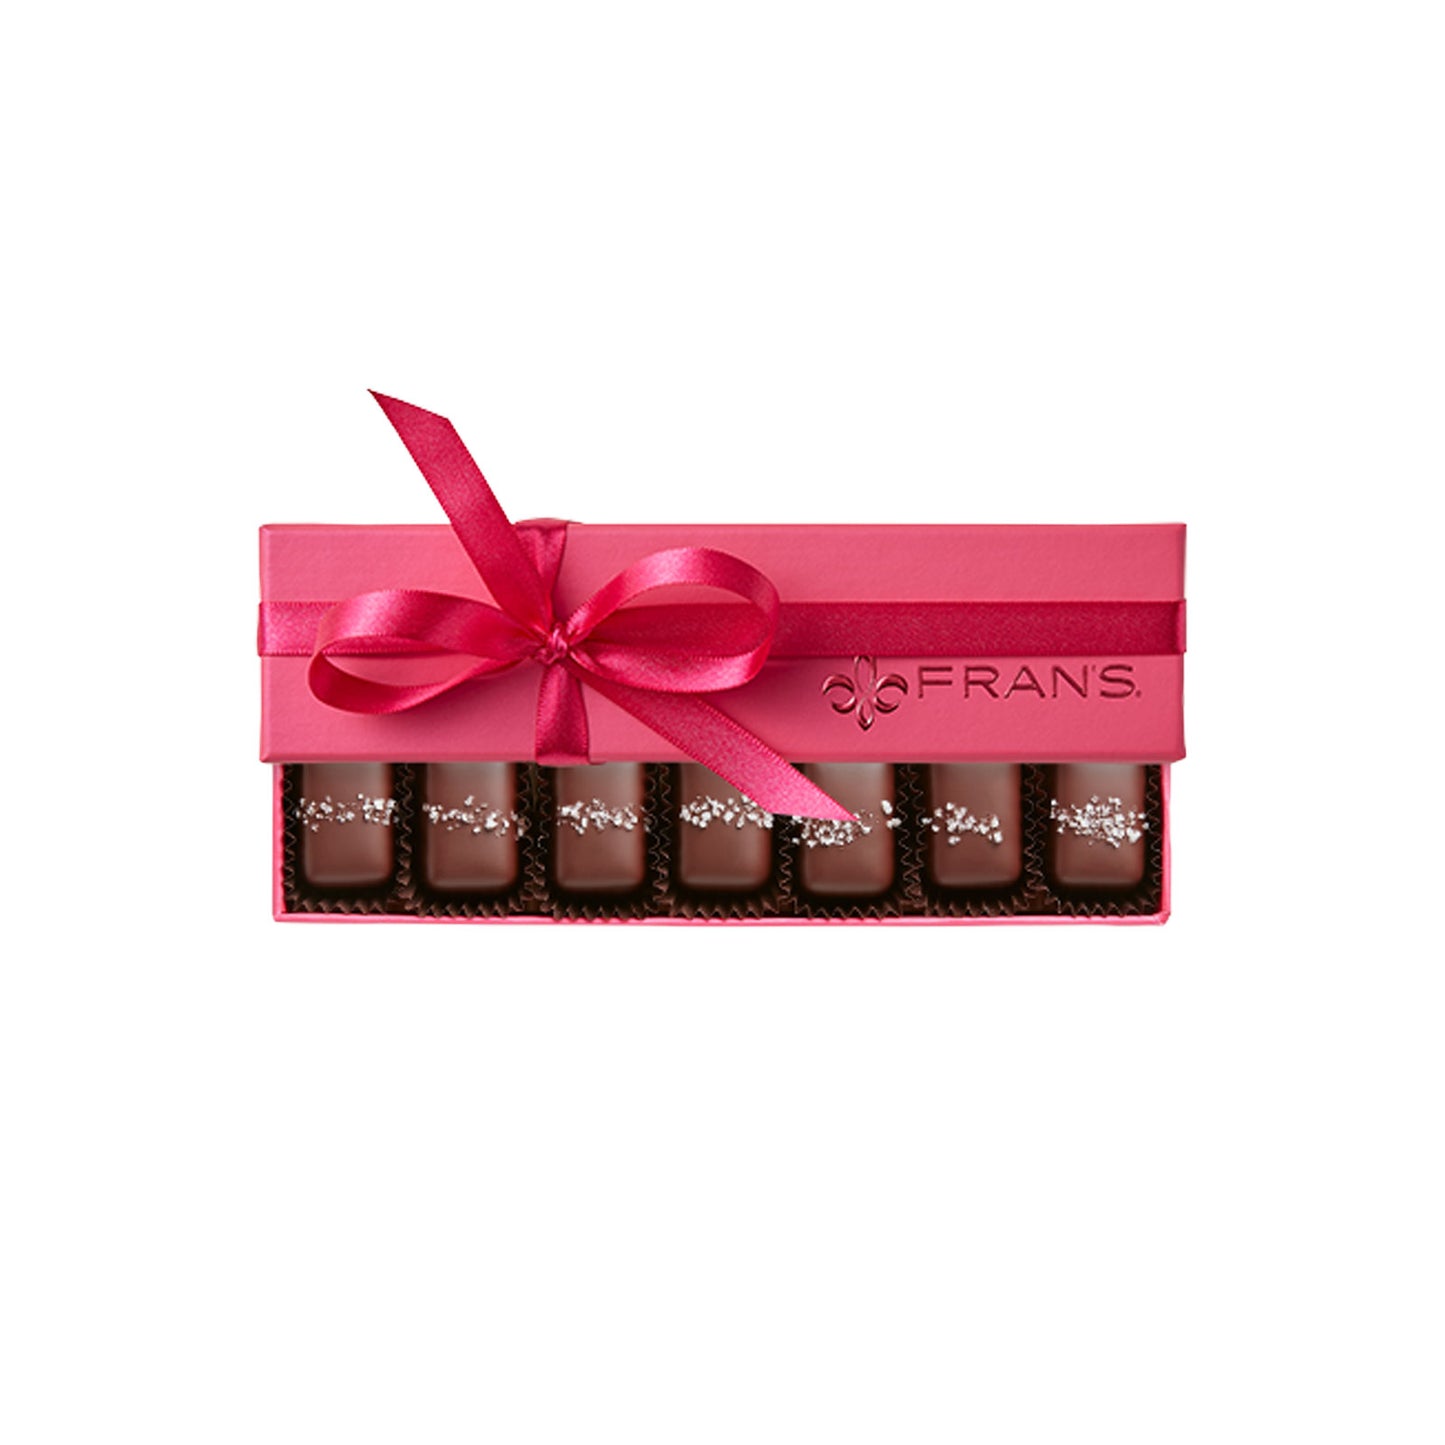 Gray Salt Caramels, 7pc. by Fran's with Valentine's Wrap